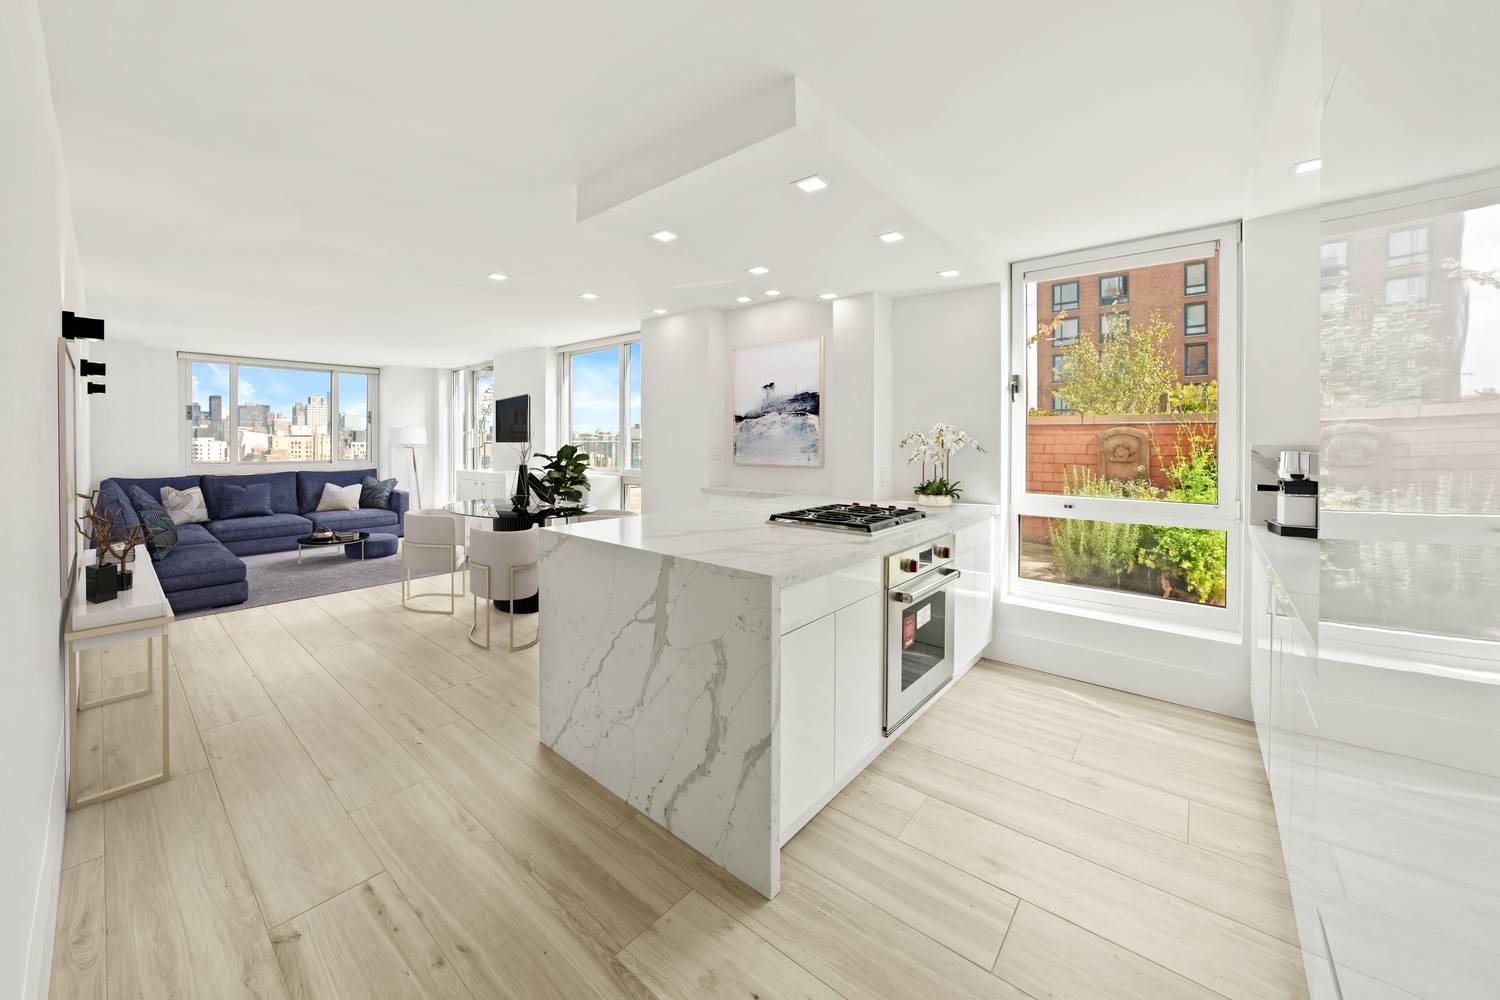 This spectacular Penthouse residence is located in the heart of Union Square and features a 2329 sqft private terrace with open Northern, Eastern and Southern views.